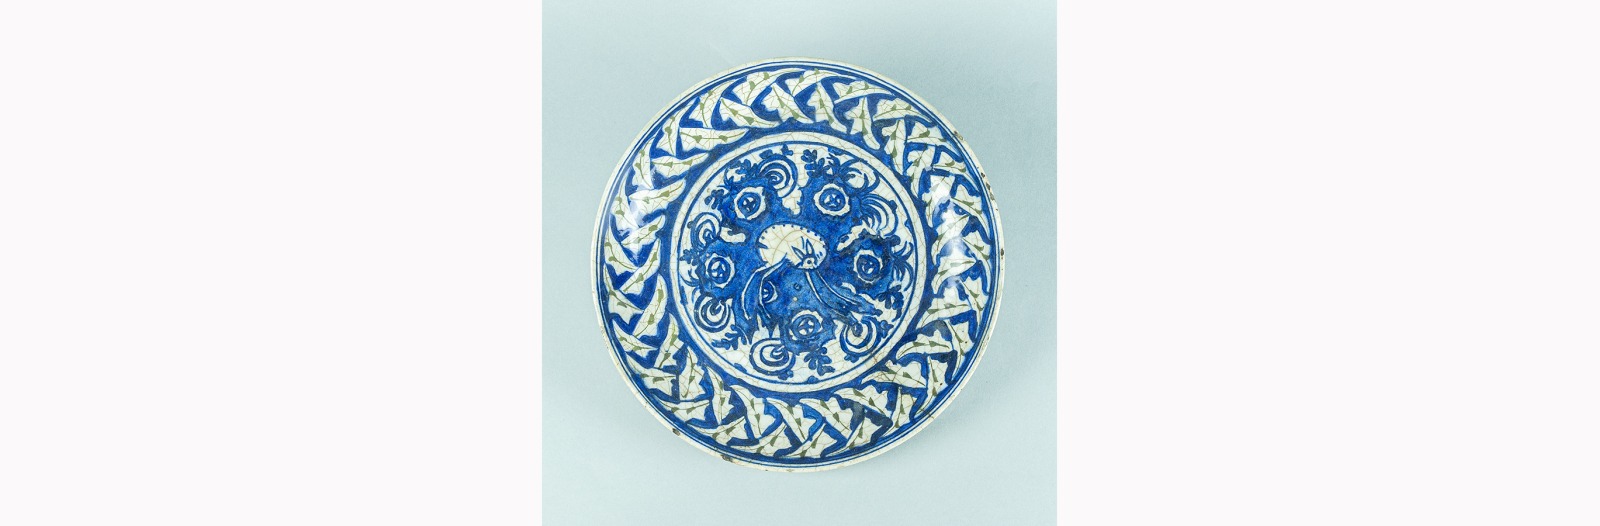 Image of a patterned blue and white dish with a stylized small deer-like animal at the center.